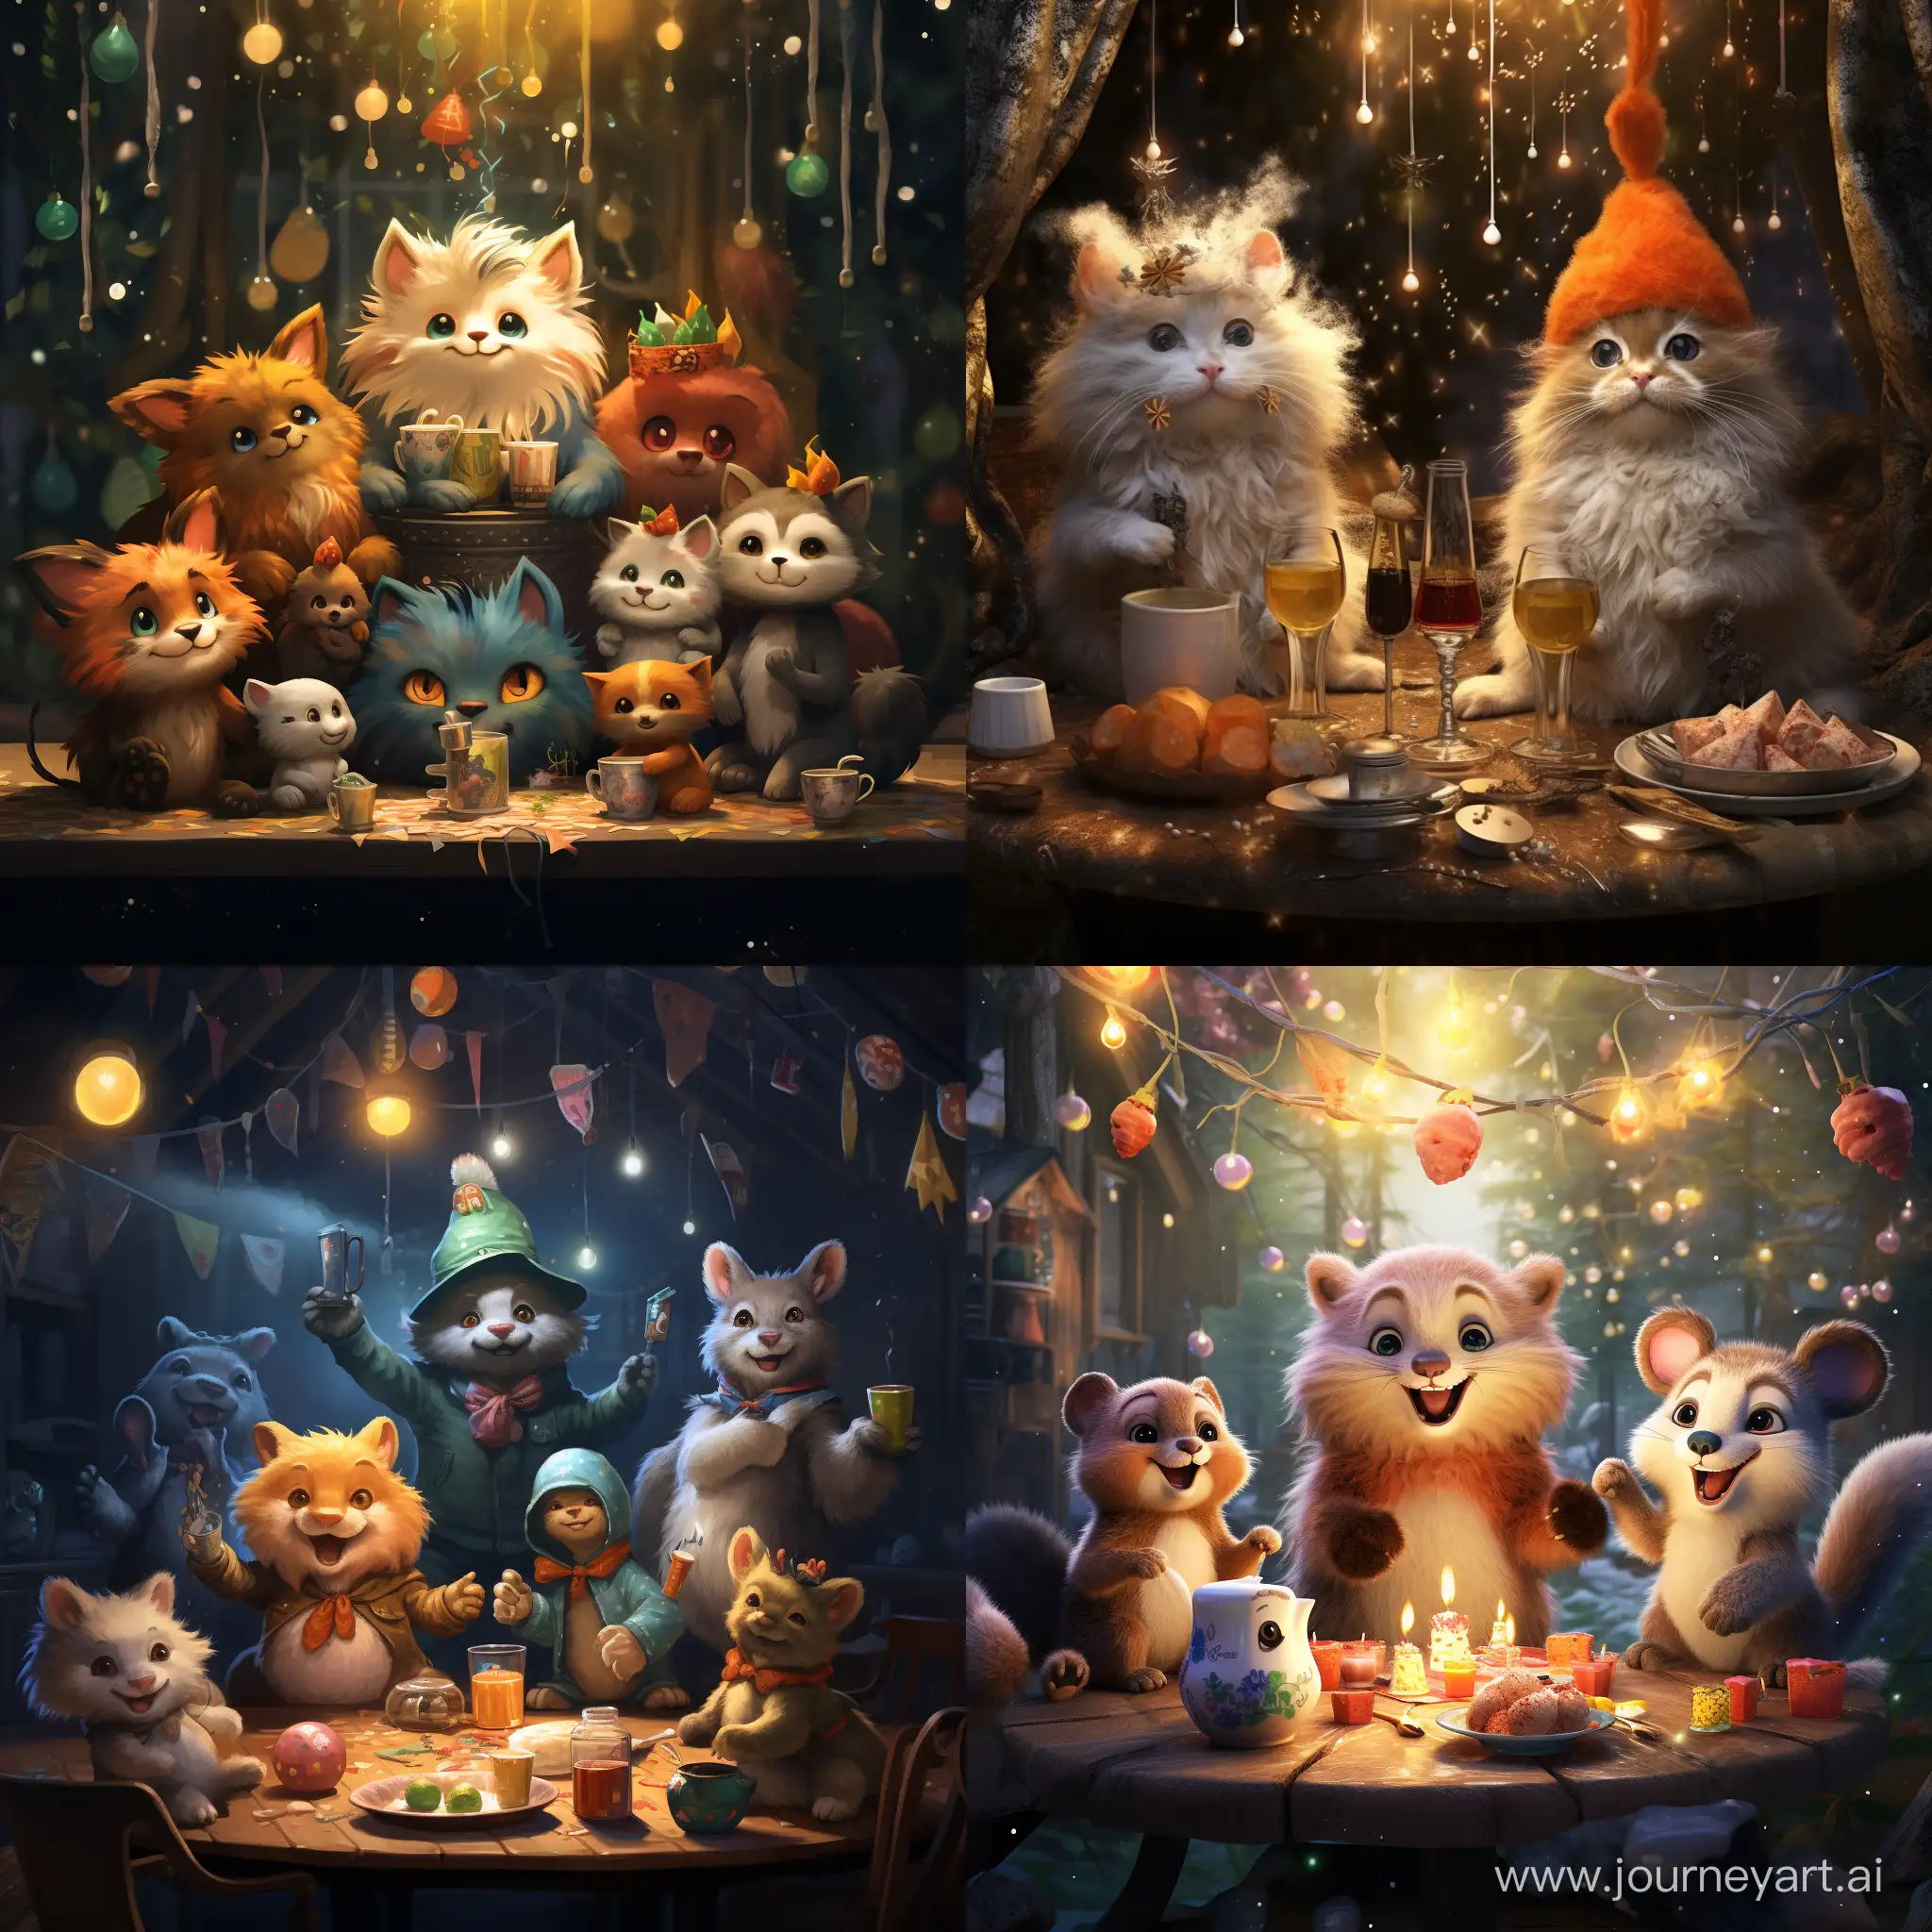 Festive-New-Year-Celebration-of-Small-Furry-Creatures-in-Alternate-Universe